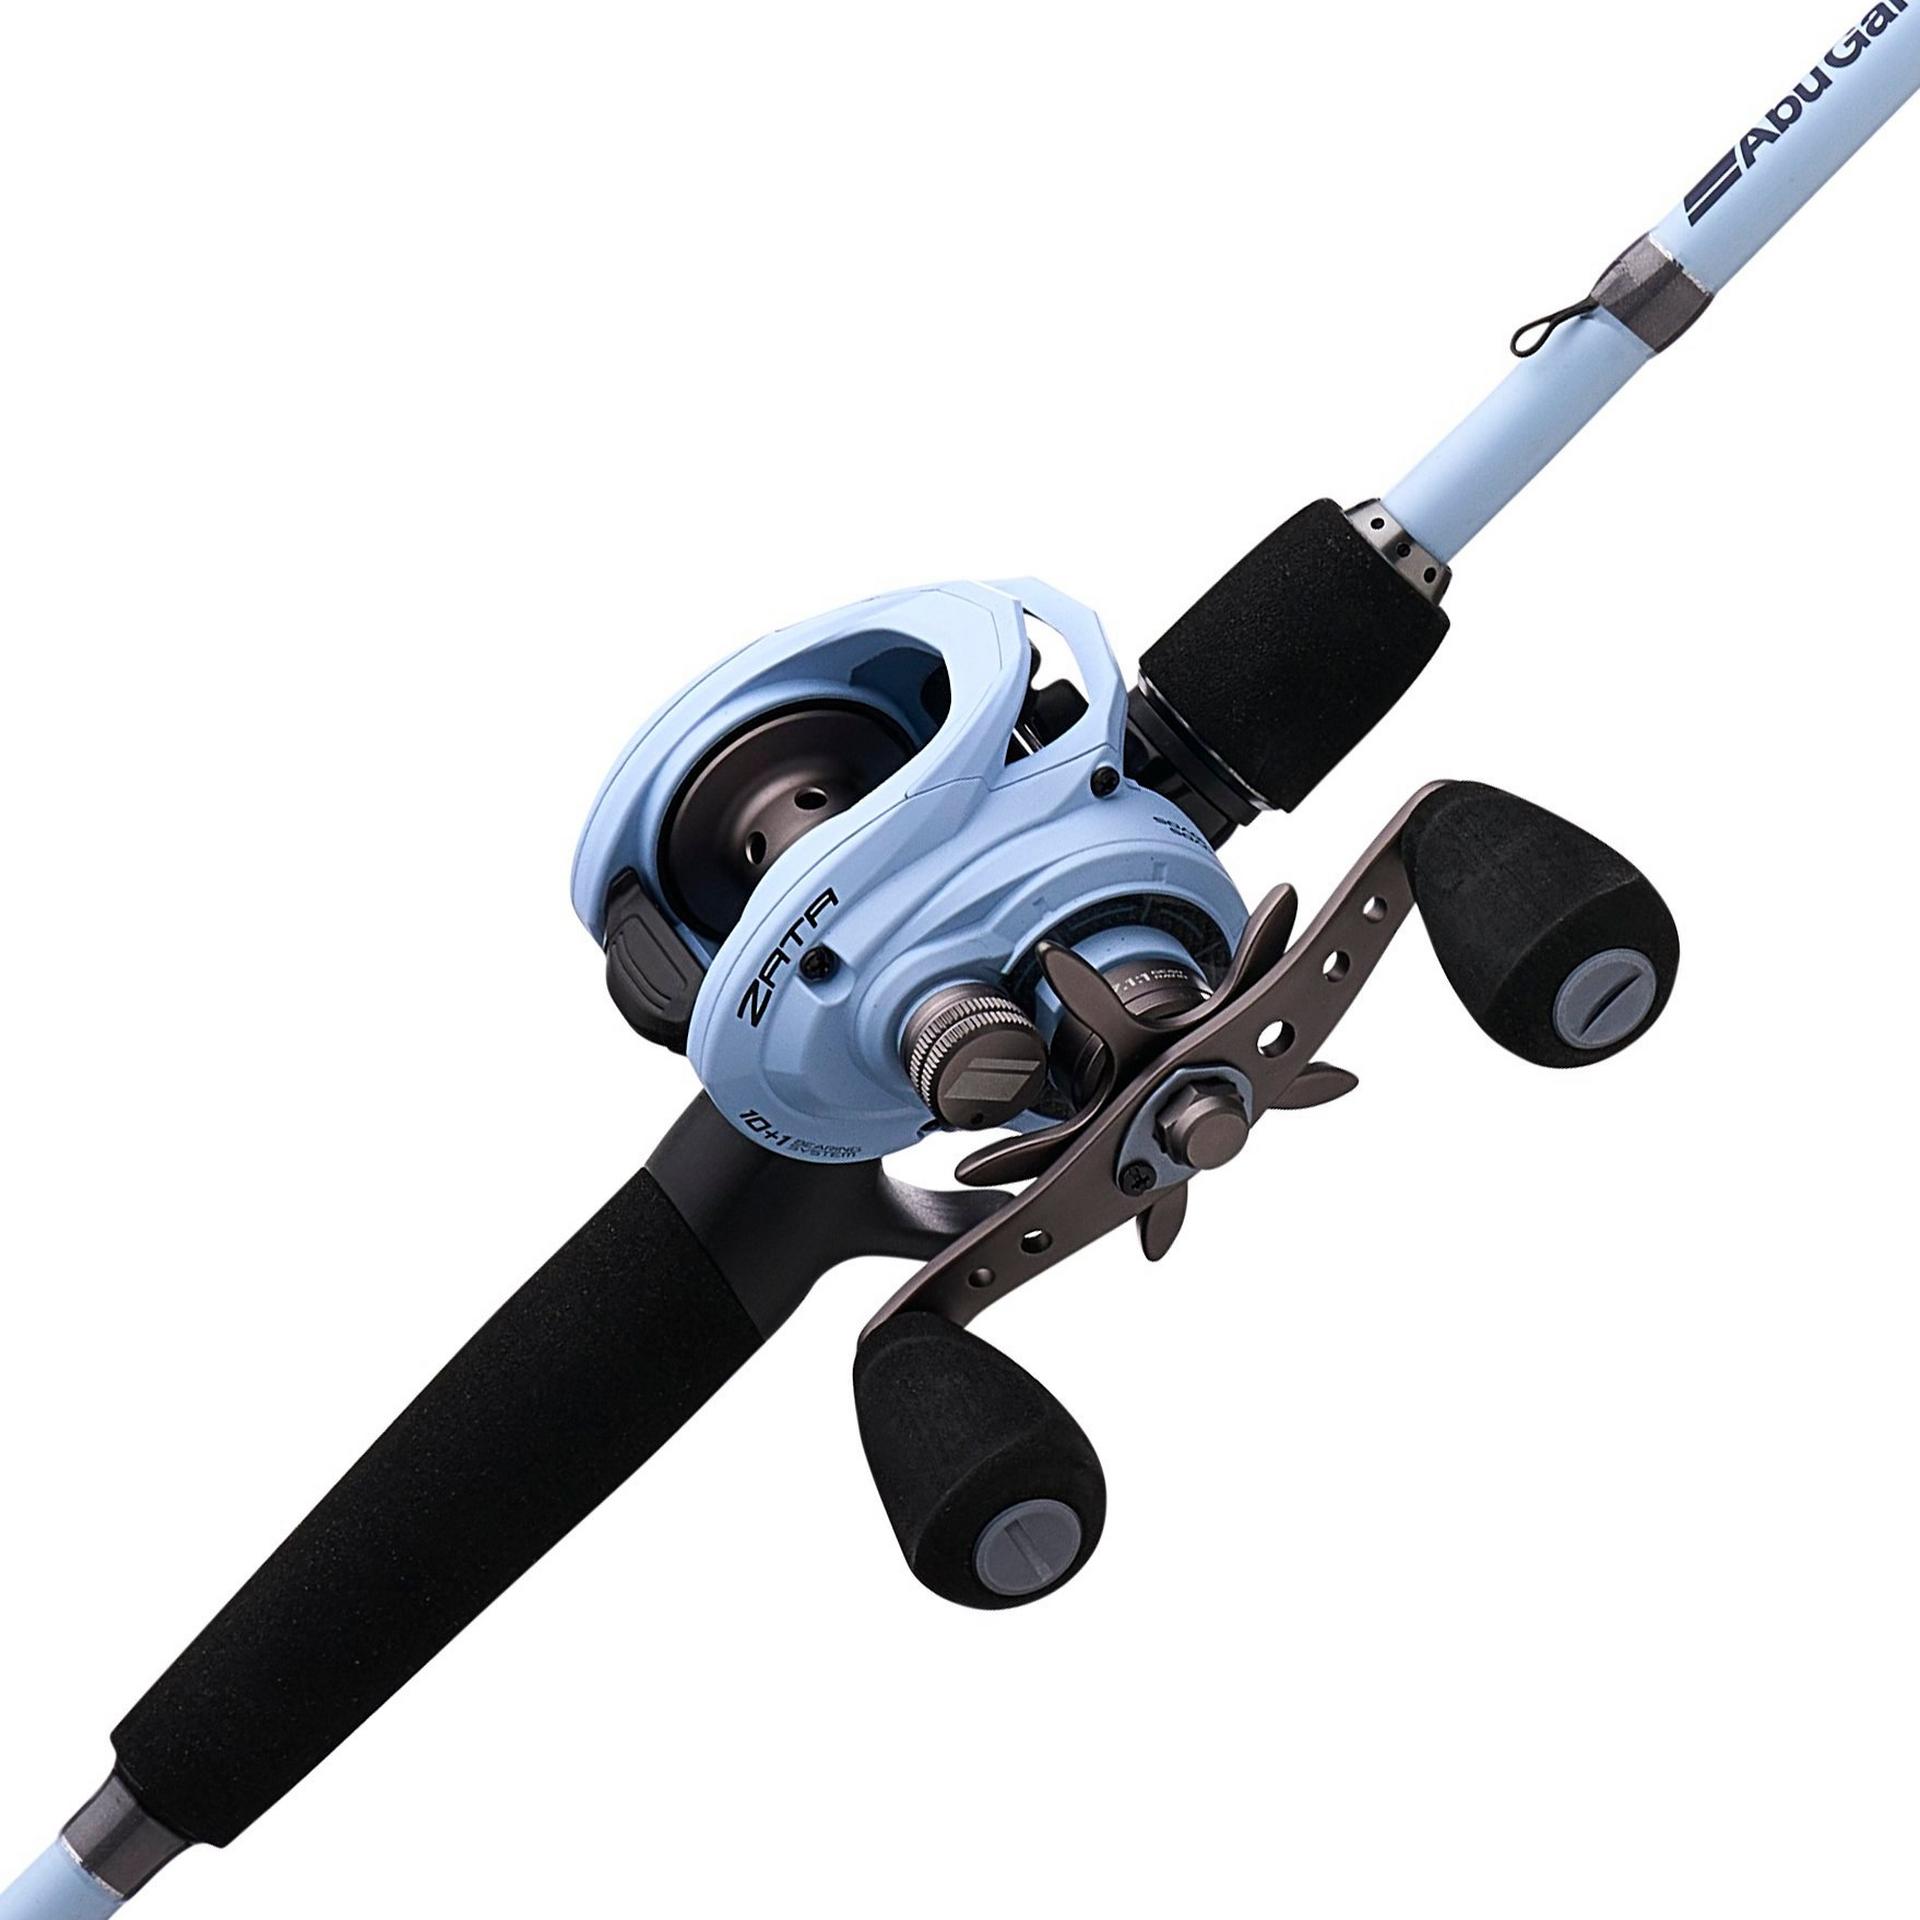 Pro Fishing Rod and Reel Combos,24-Ton Carbon Fiber Fishing Poles with  Baitcast 